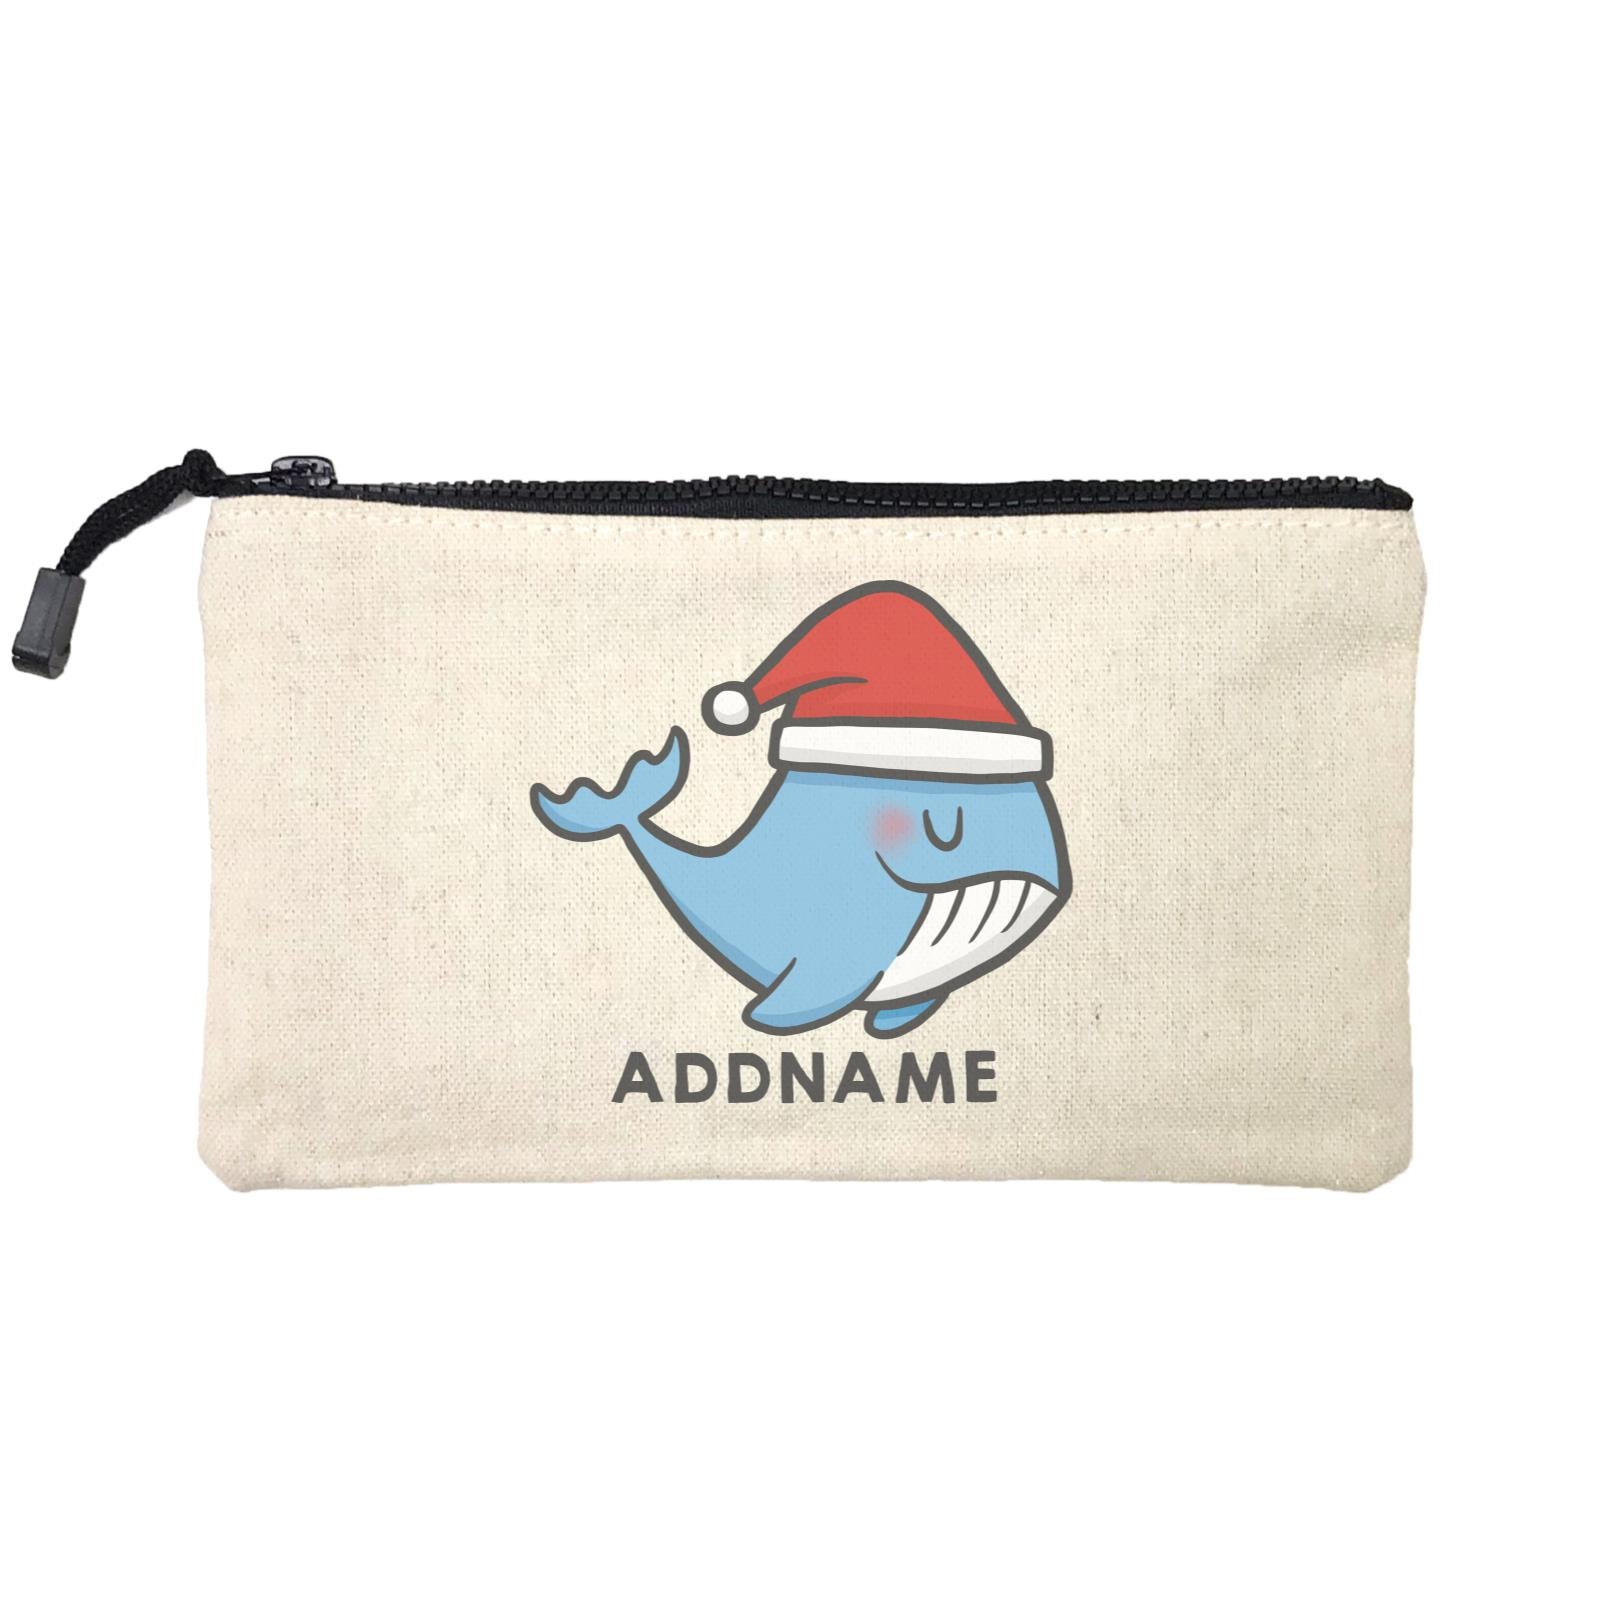 Xmas CuteWhale Christmas Hat Addname Mini Accessories Stationery Pouch